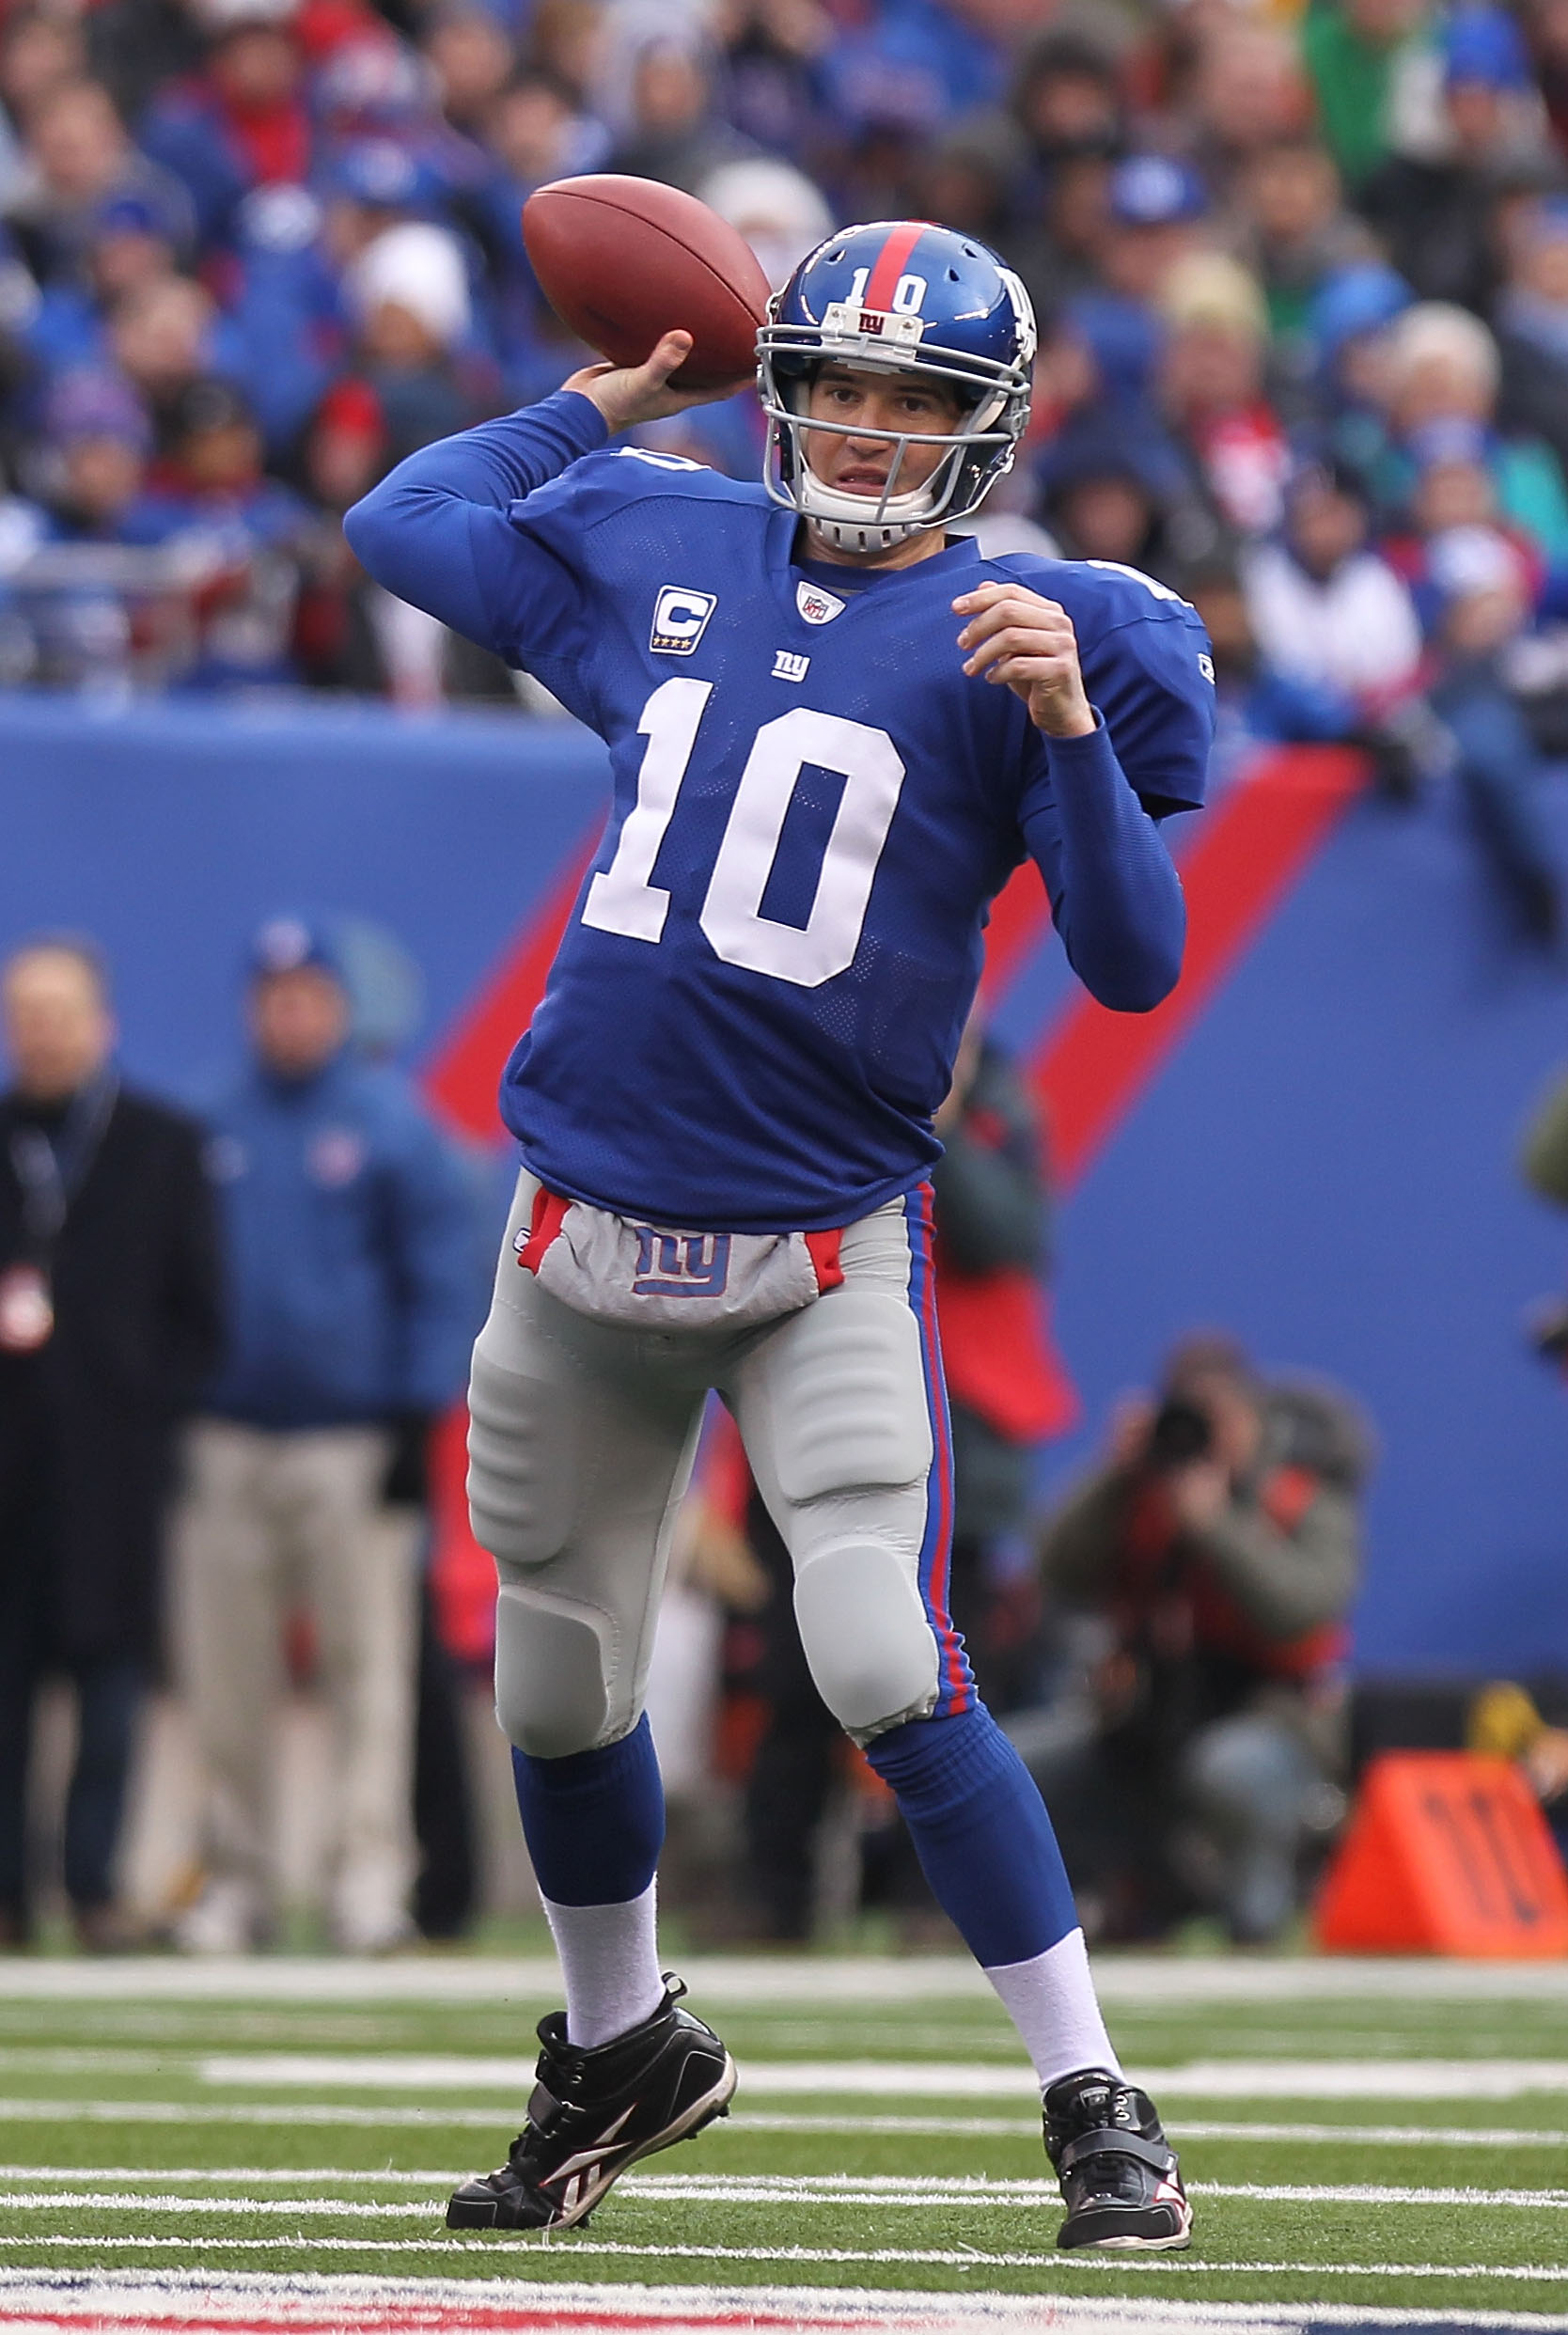 EAST RUTHERFORD, NJ - DECEMBER 19:  Eli Manning #10 of the New York Giants passes against the Philadelphia Eagles at New Meadowlands Stadium on December 19, 2010 in East Rutherford, New Jersey.  (Photo by Nick Laham/Getty Images)